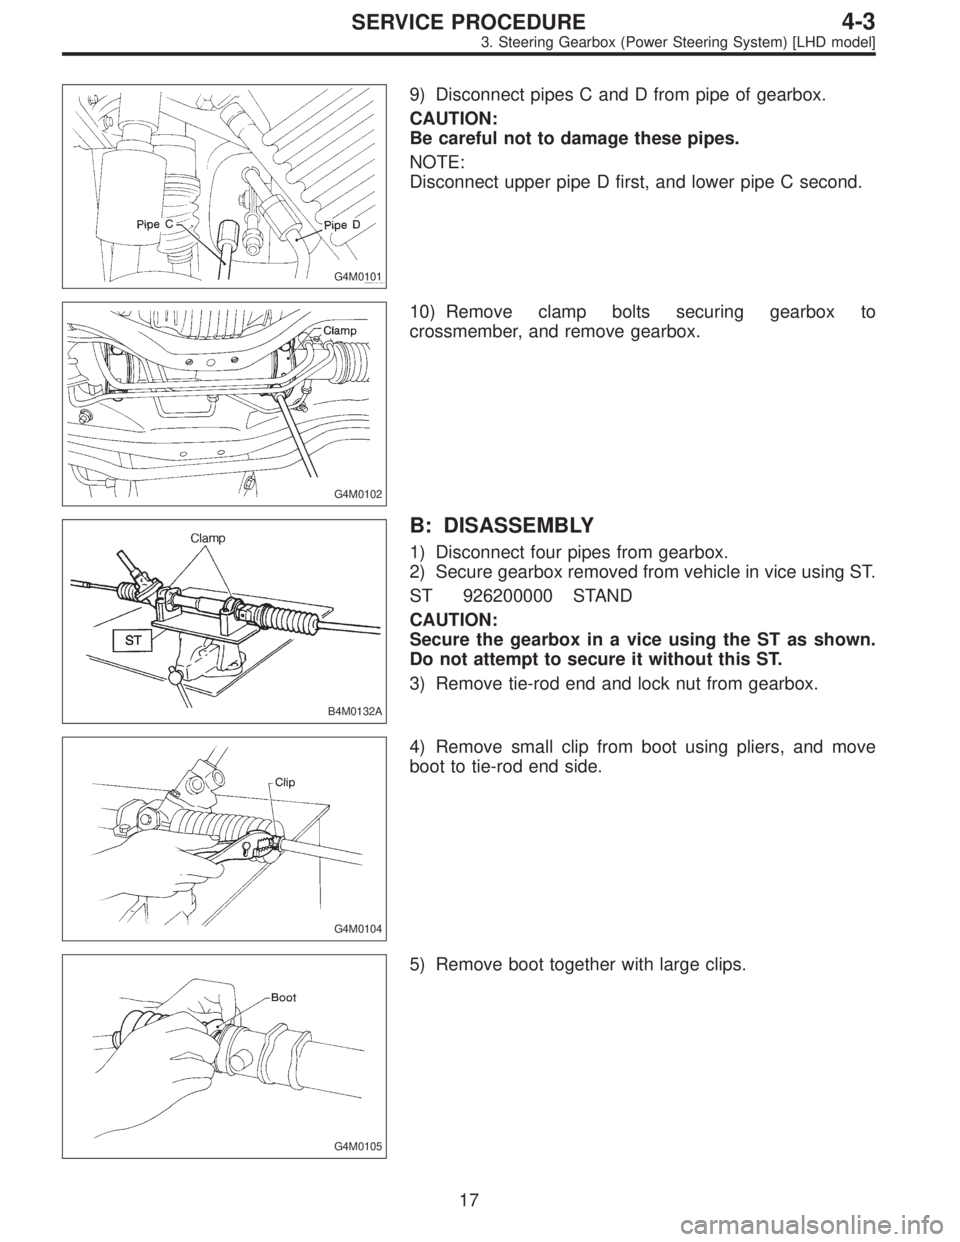 SUBARU LEGACY 1997  Service Repair Manual G4M0101
9) Disconnect pipes C and D from pipe of gearbox.
CAUTION:
Be careful not to damage these pipes.
NOTE:
Disconnect upper pipe D first, and lower pipe C second.
G4M0102
10) Remove clamp bolts se